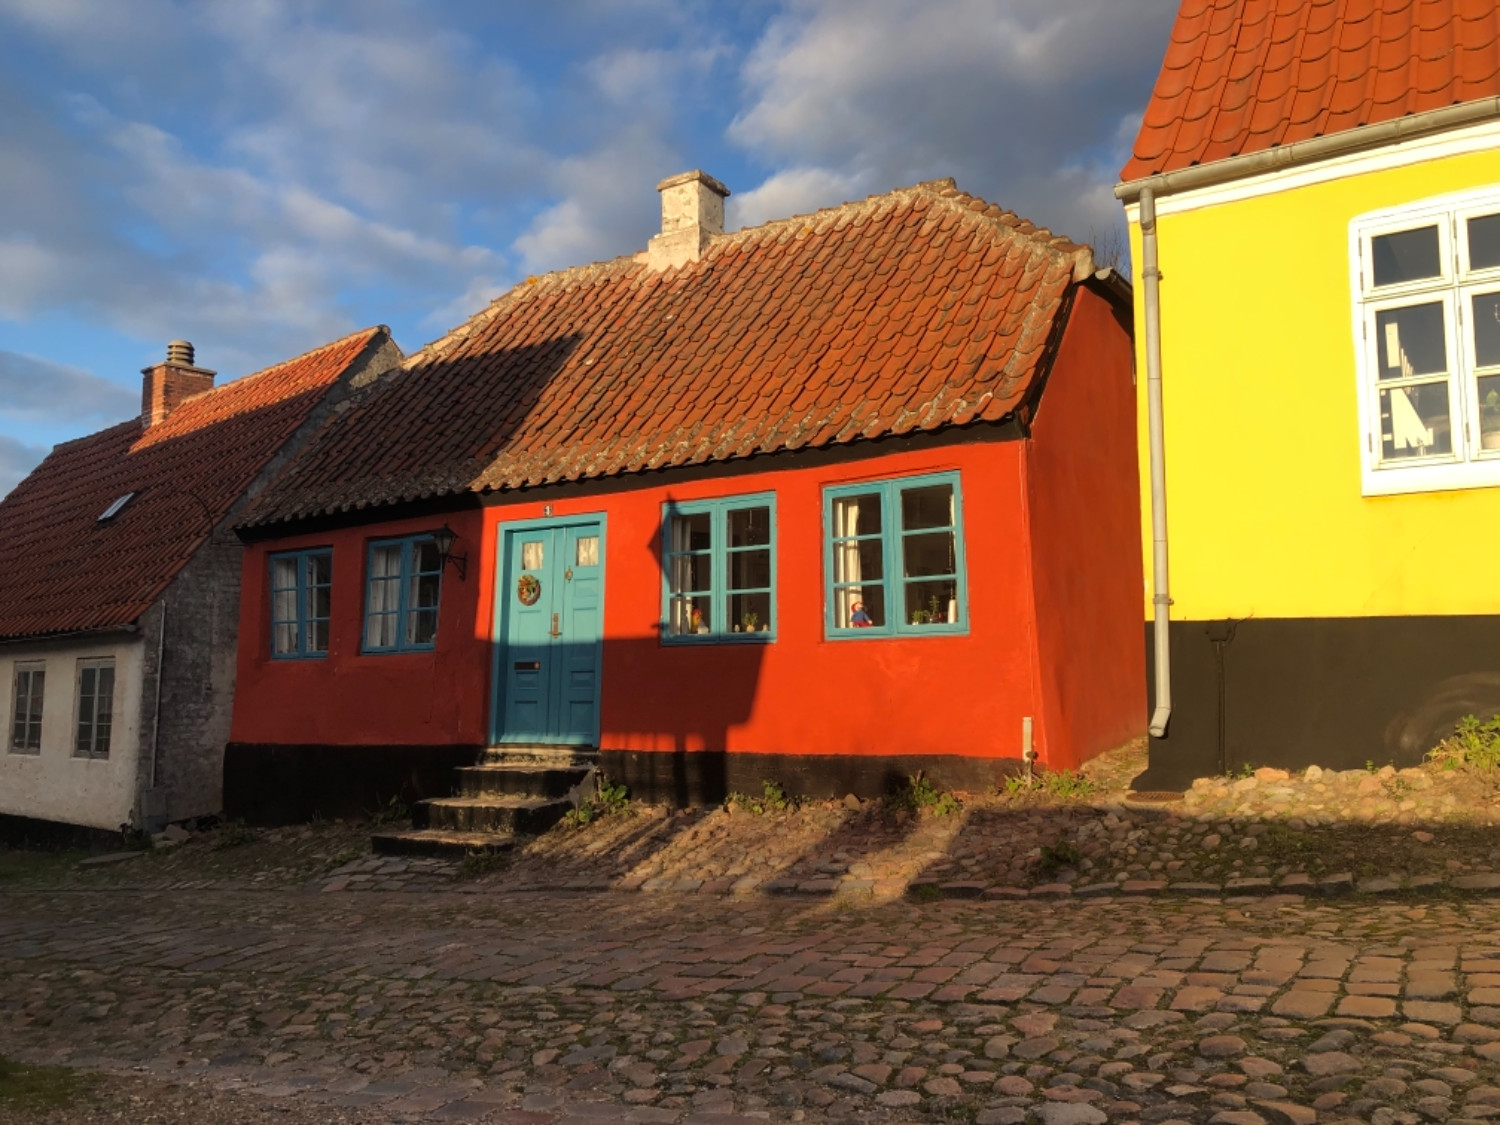 Colourful old house